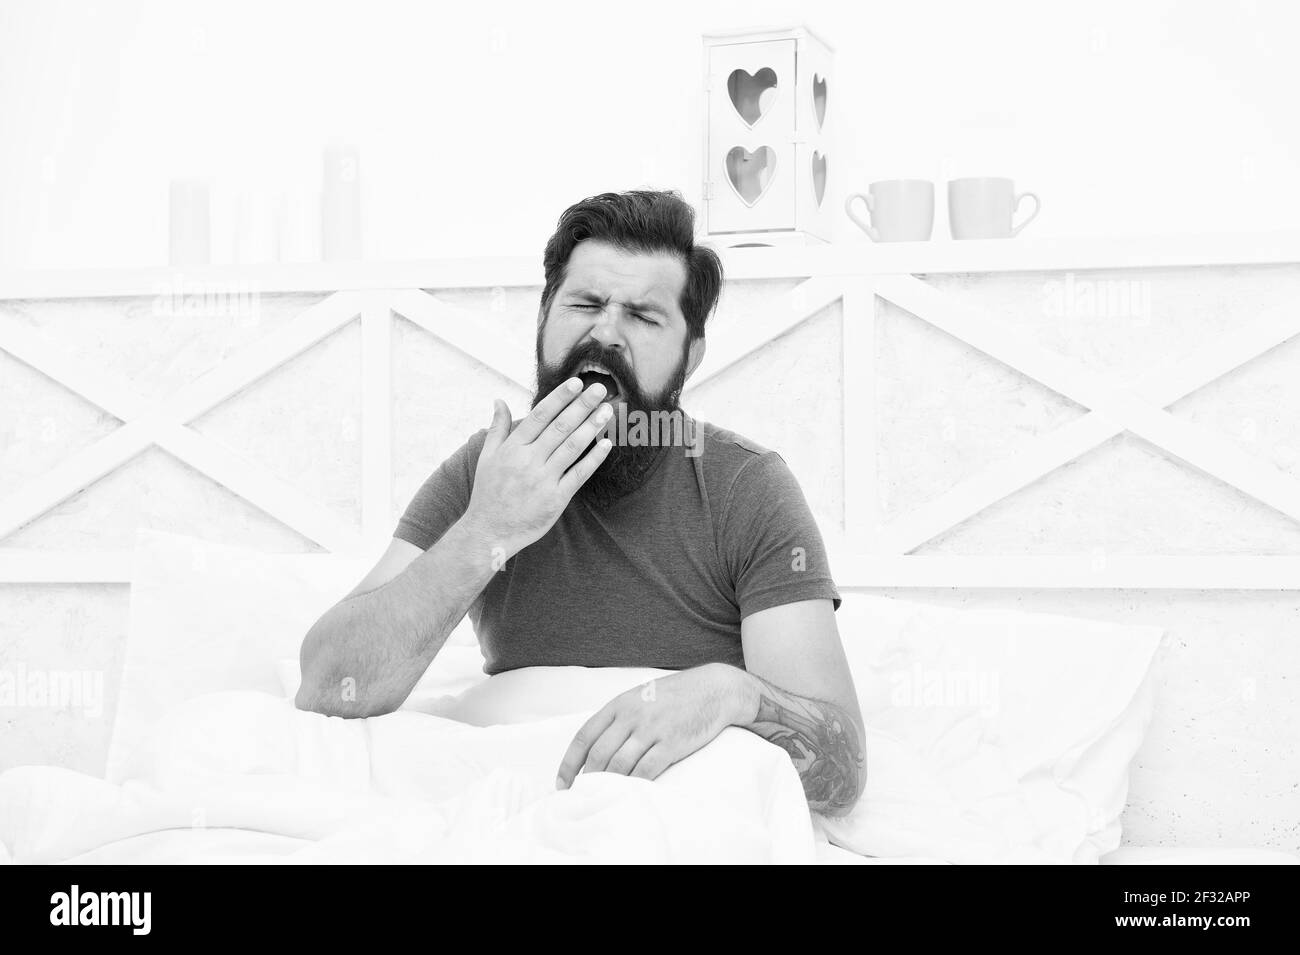 Lethargic tired man sitting in bed yawning as he struggles to wake up unmotivated to start the new day, early morning routine Stock Photo